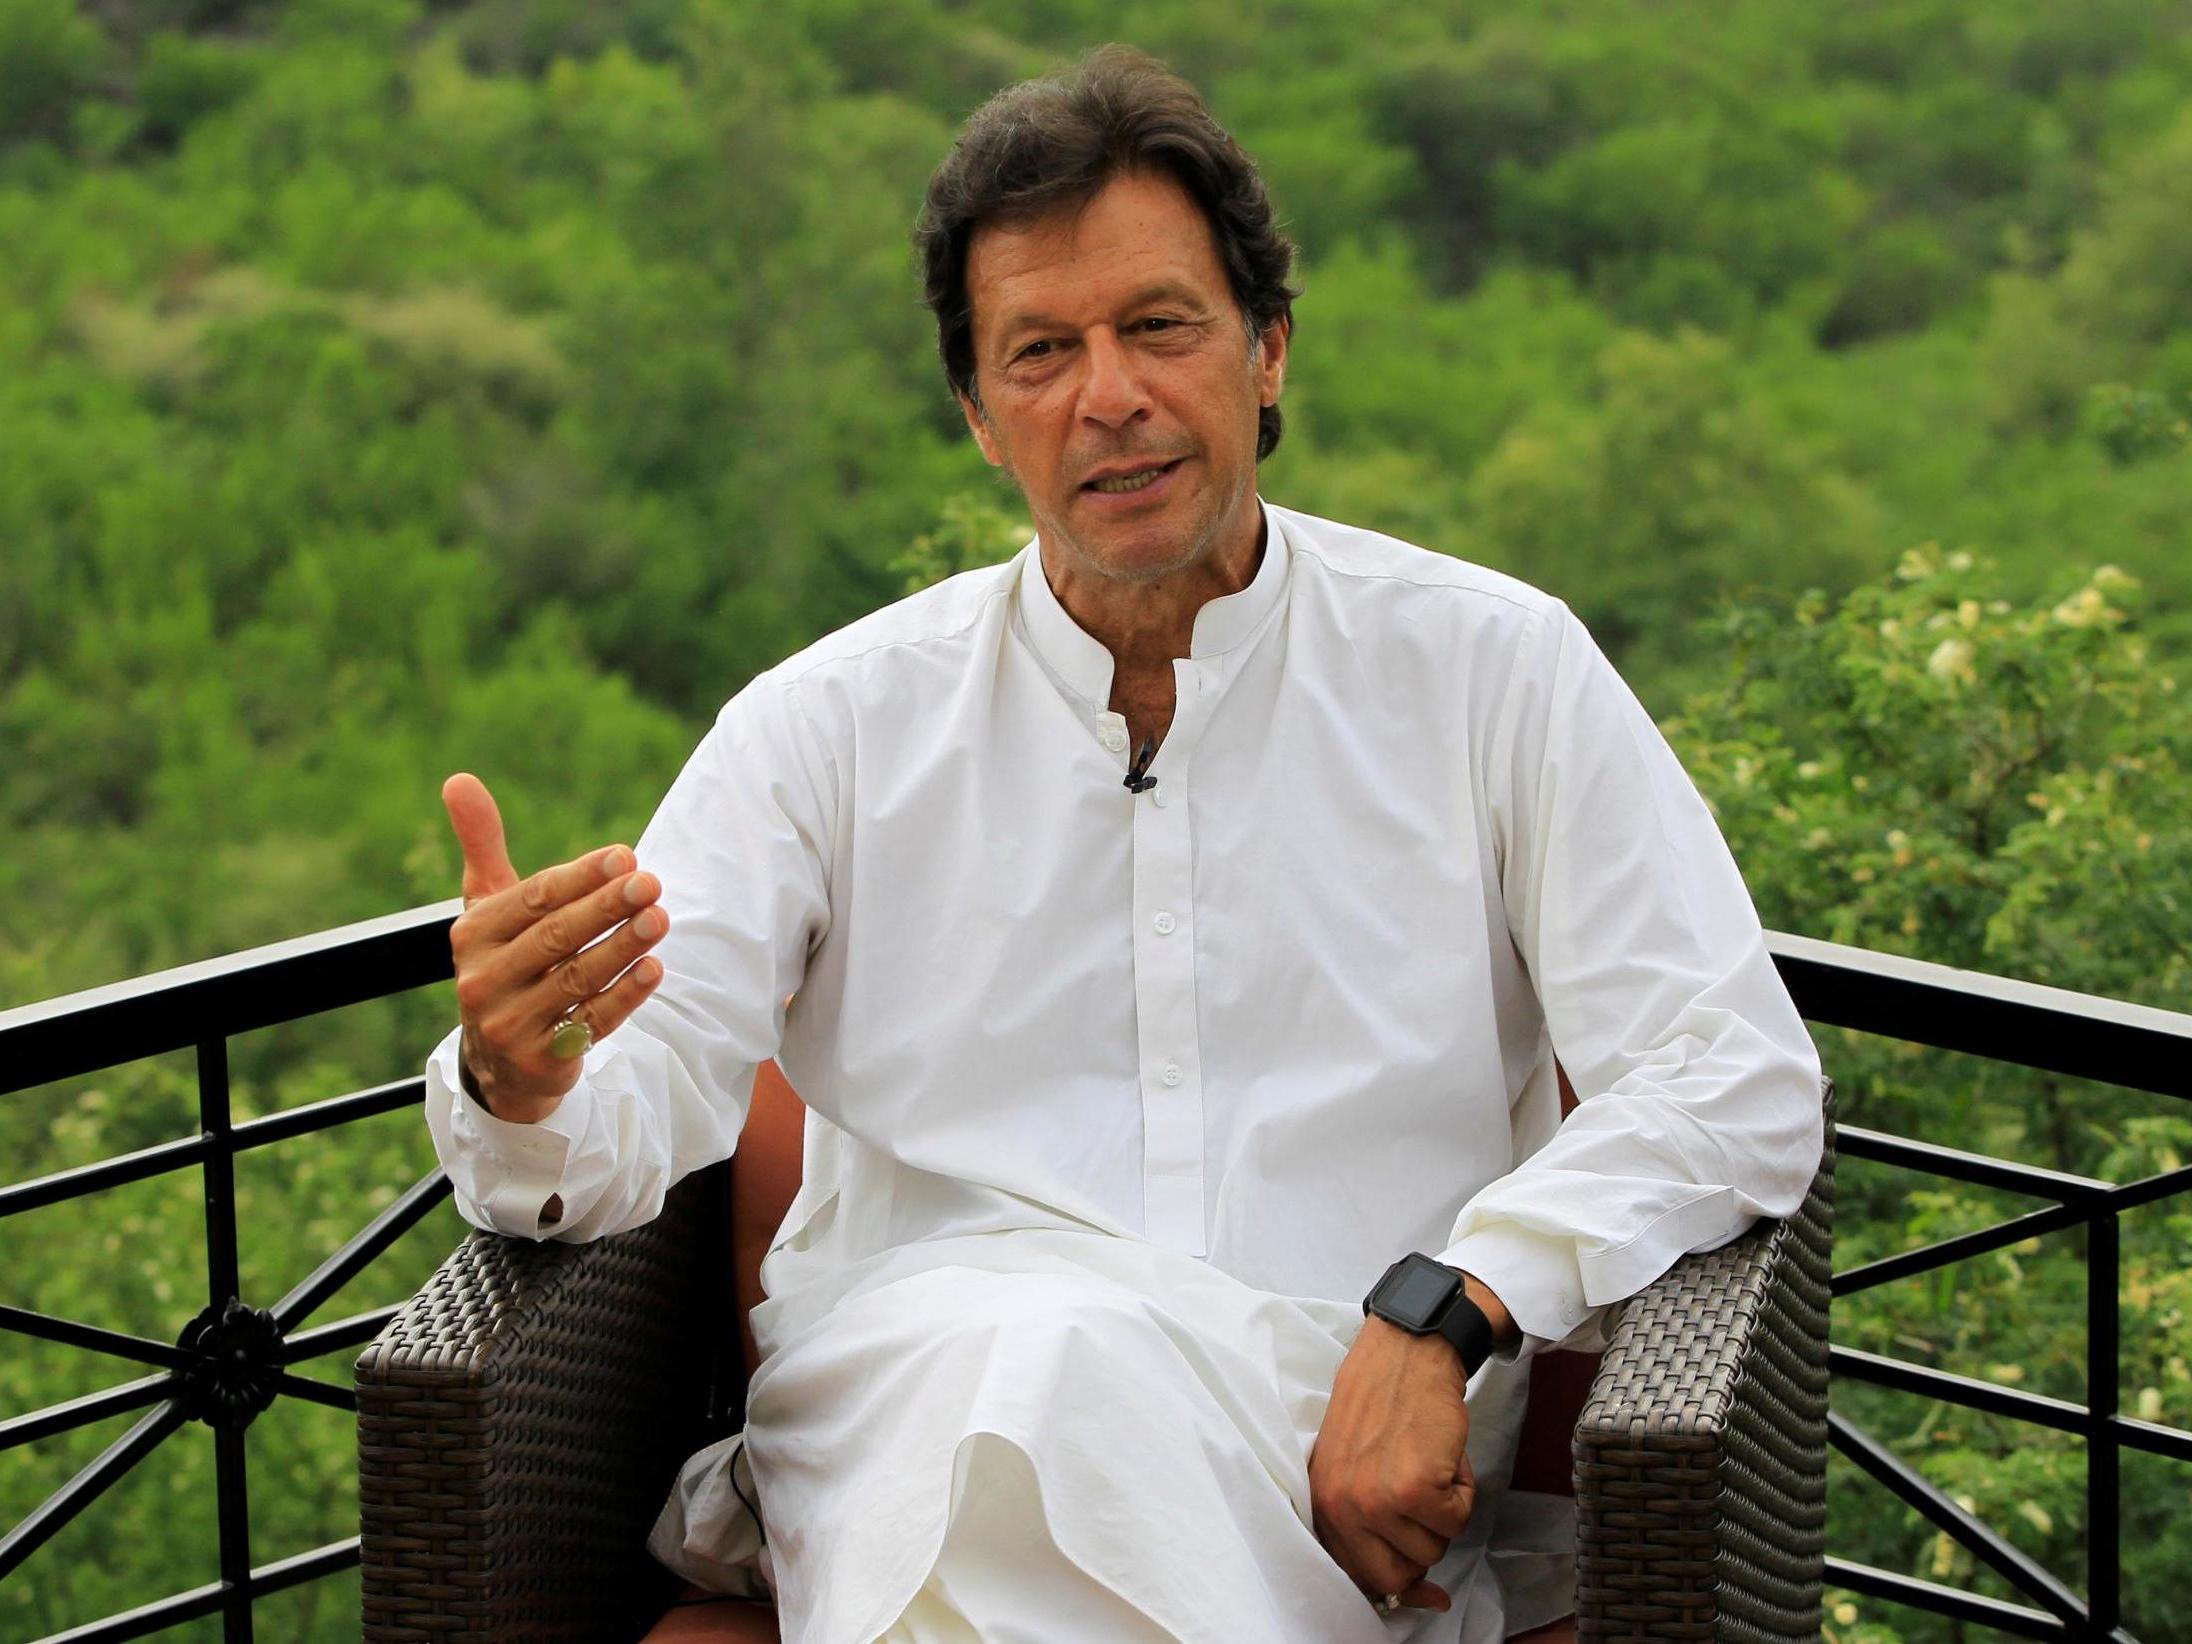 The plan is part of new prime minister Imran Khan's wide-ranging programme of reforms